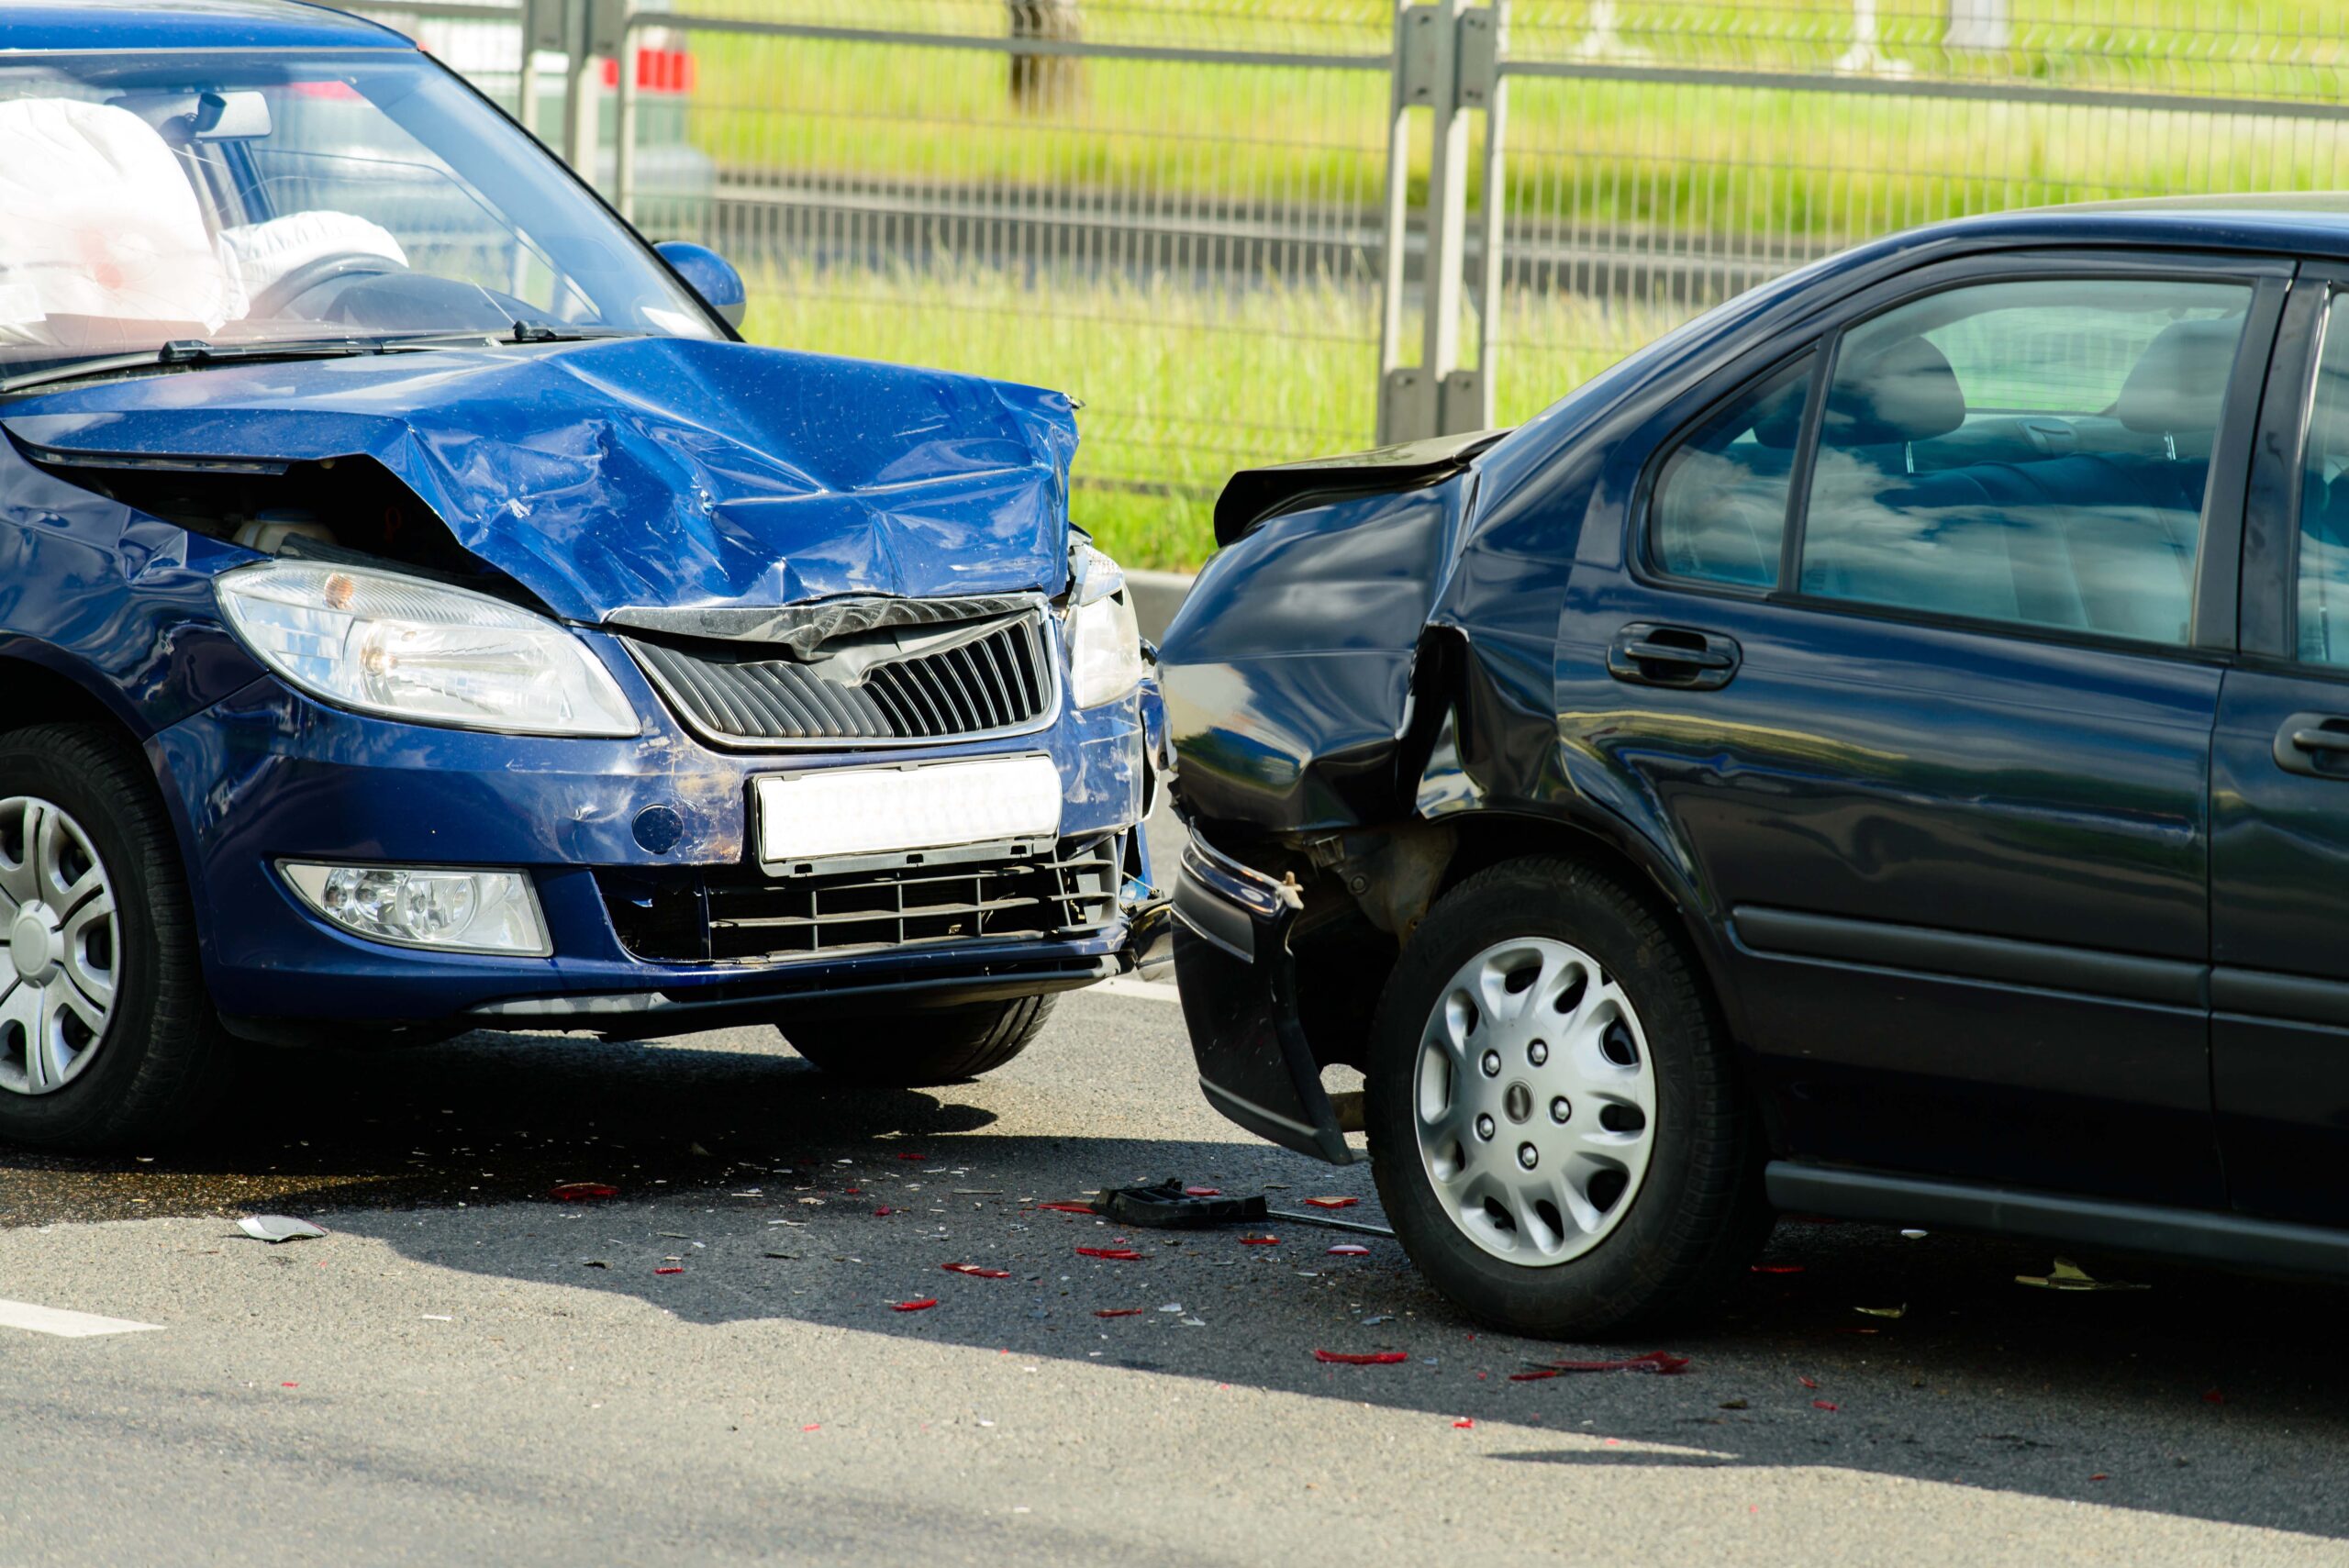 Understanding Your Auto Insurance Policy